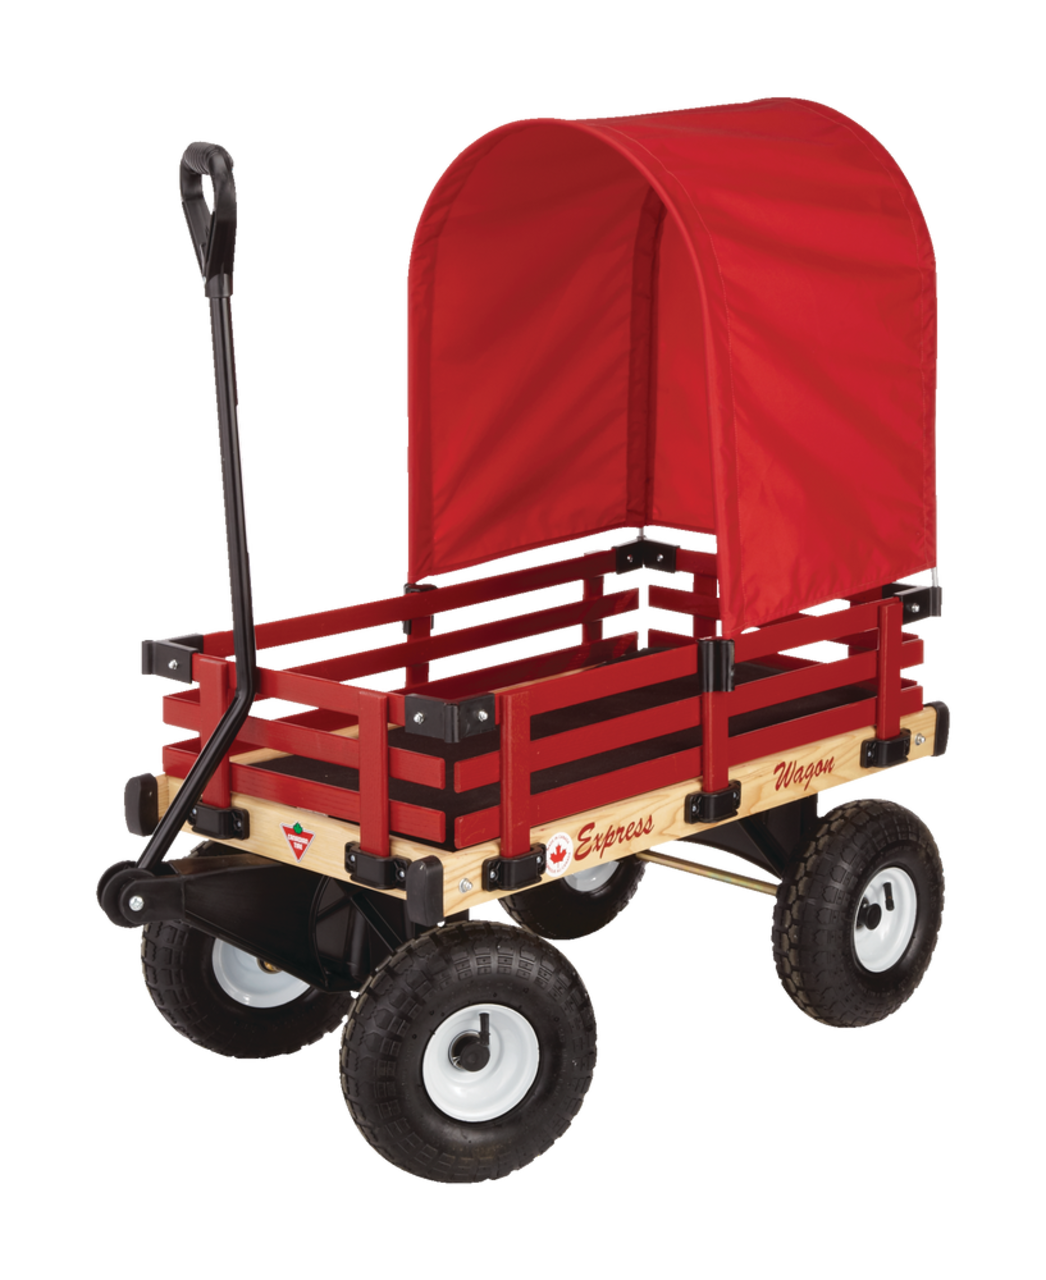 Millside Deluxe Toy Wagon, 2-Seats, Toddlers & Kids, Red